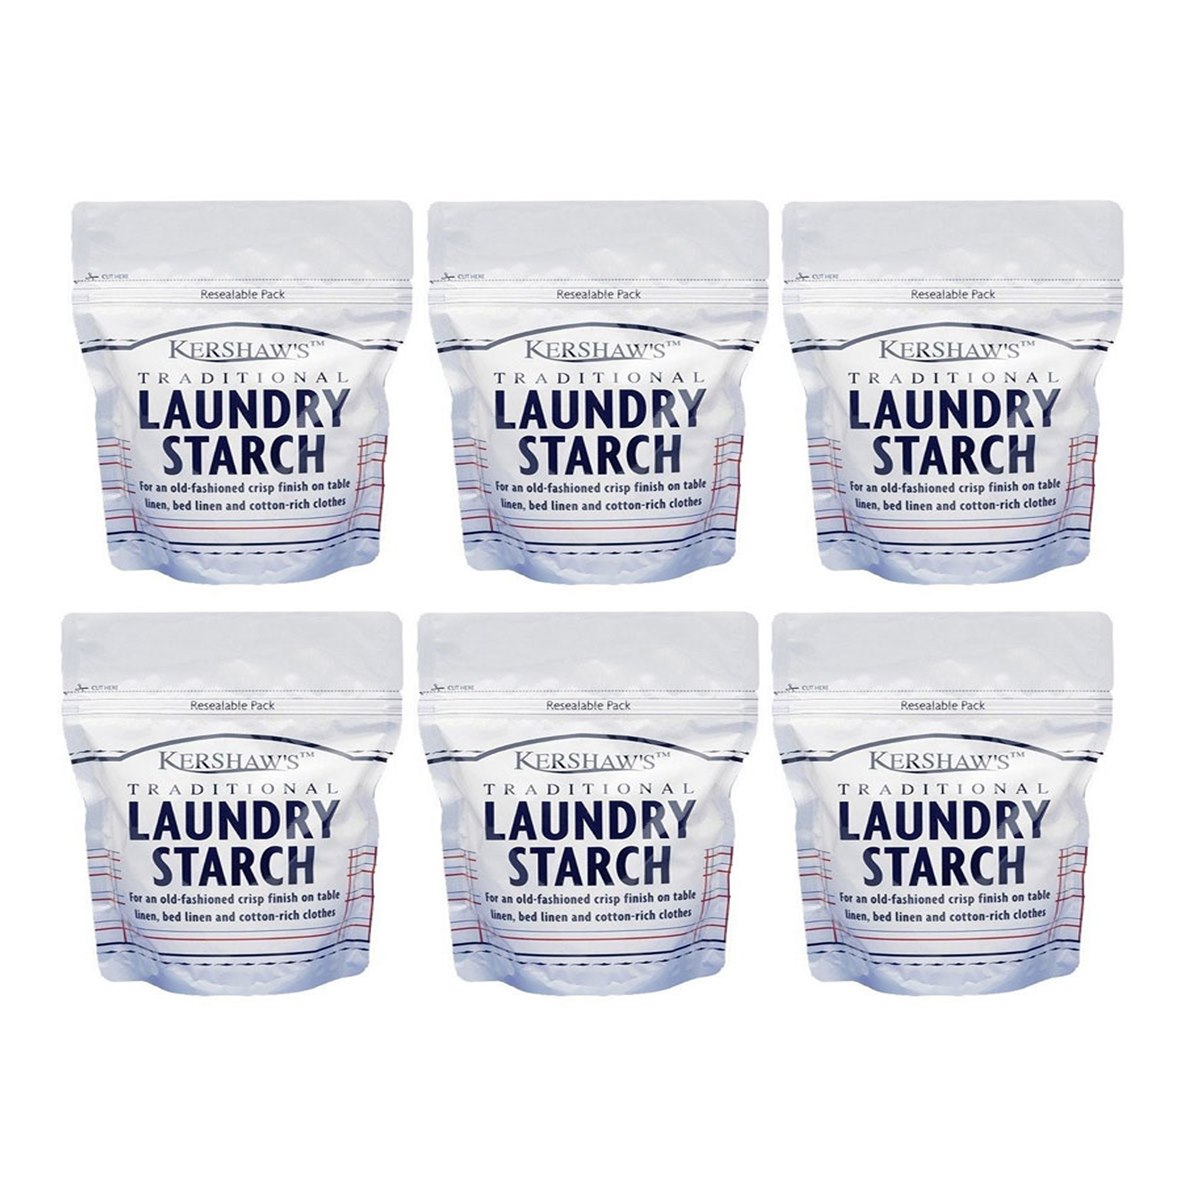 Case of 6 x Kershaws Traditional Laundry Starch 500g